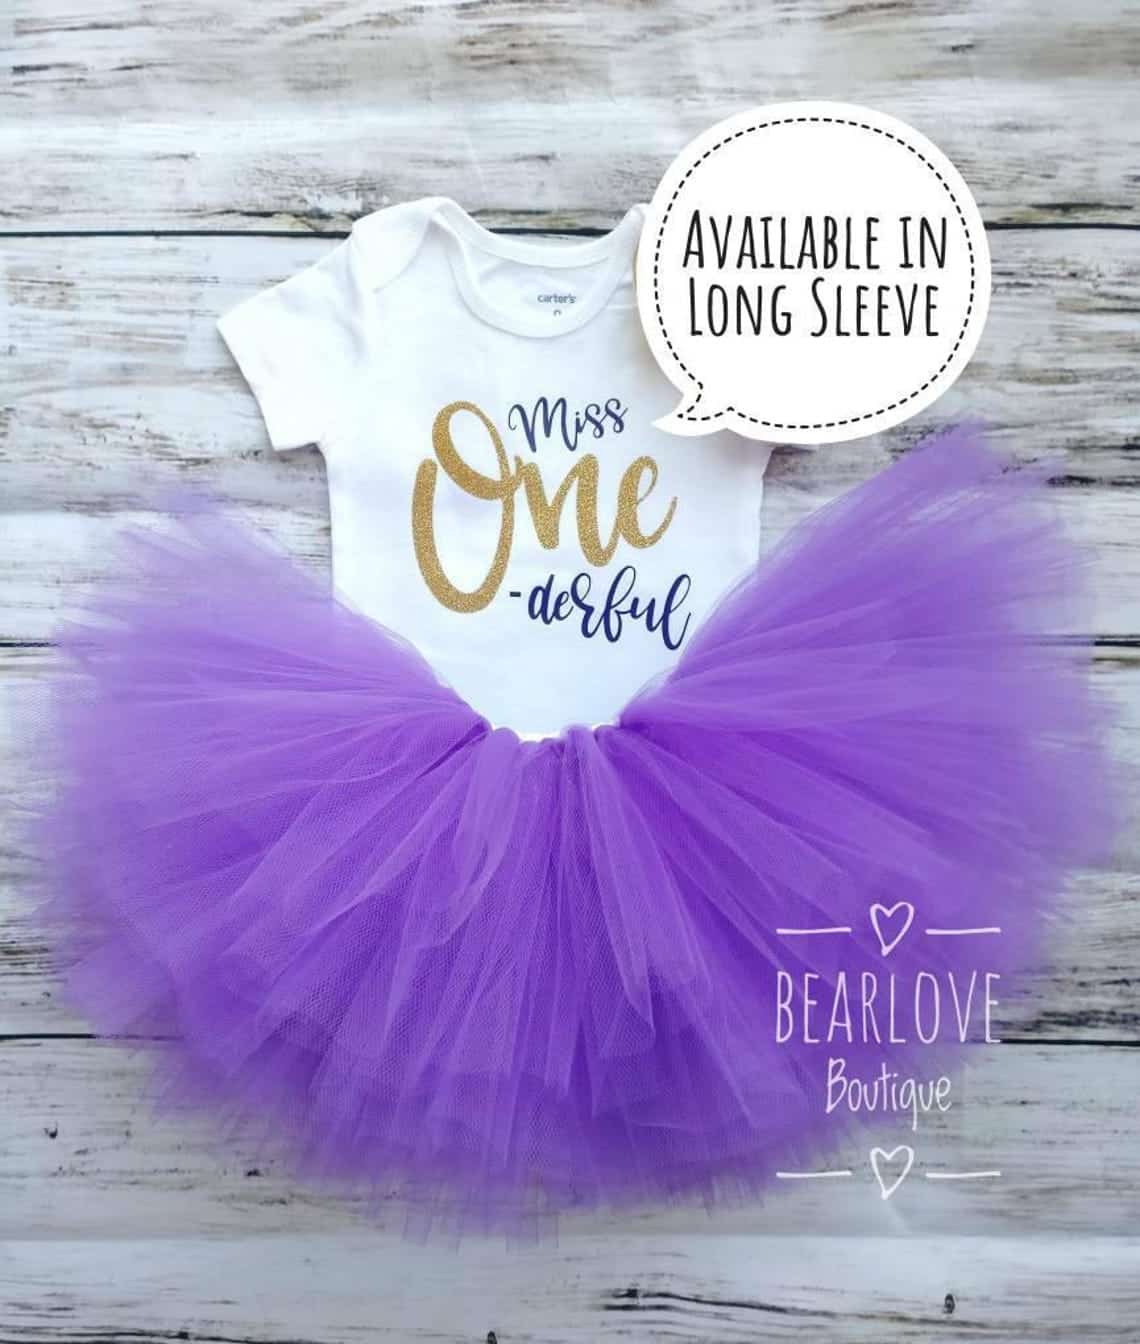 Miss-ONE-derful-Purple-Tutu-baby-kids-outfit